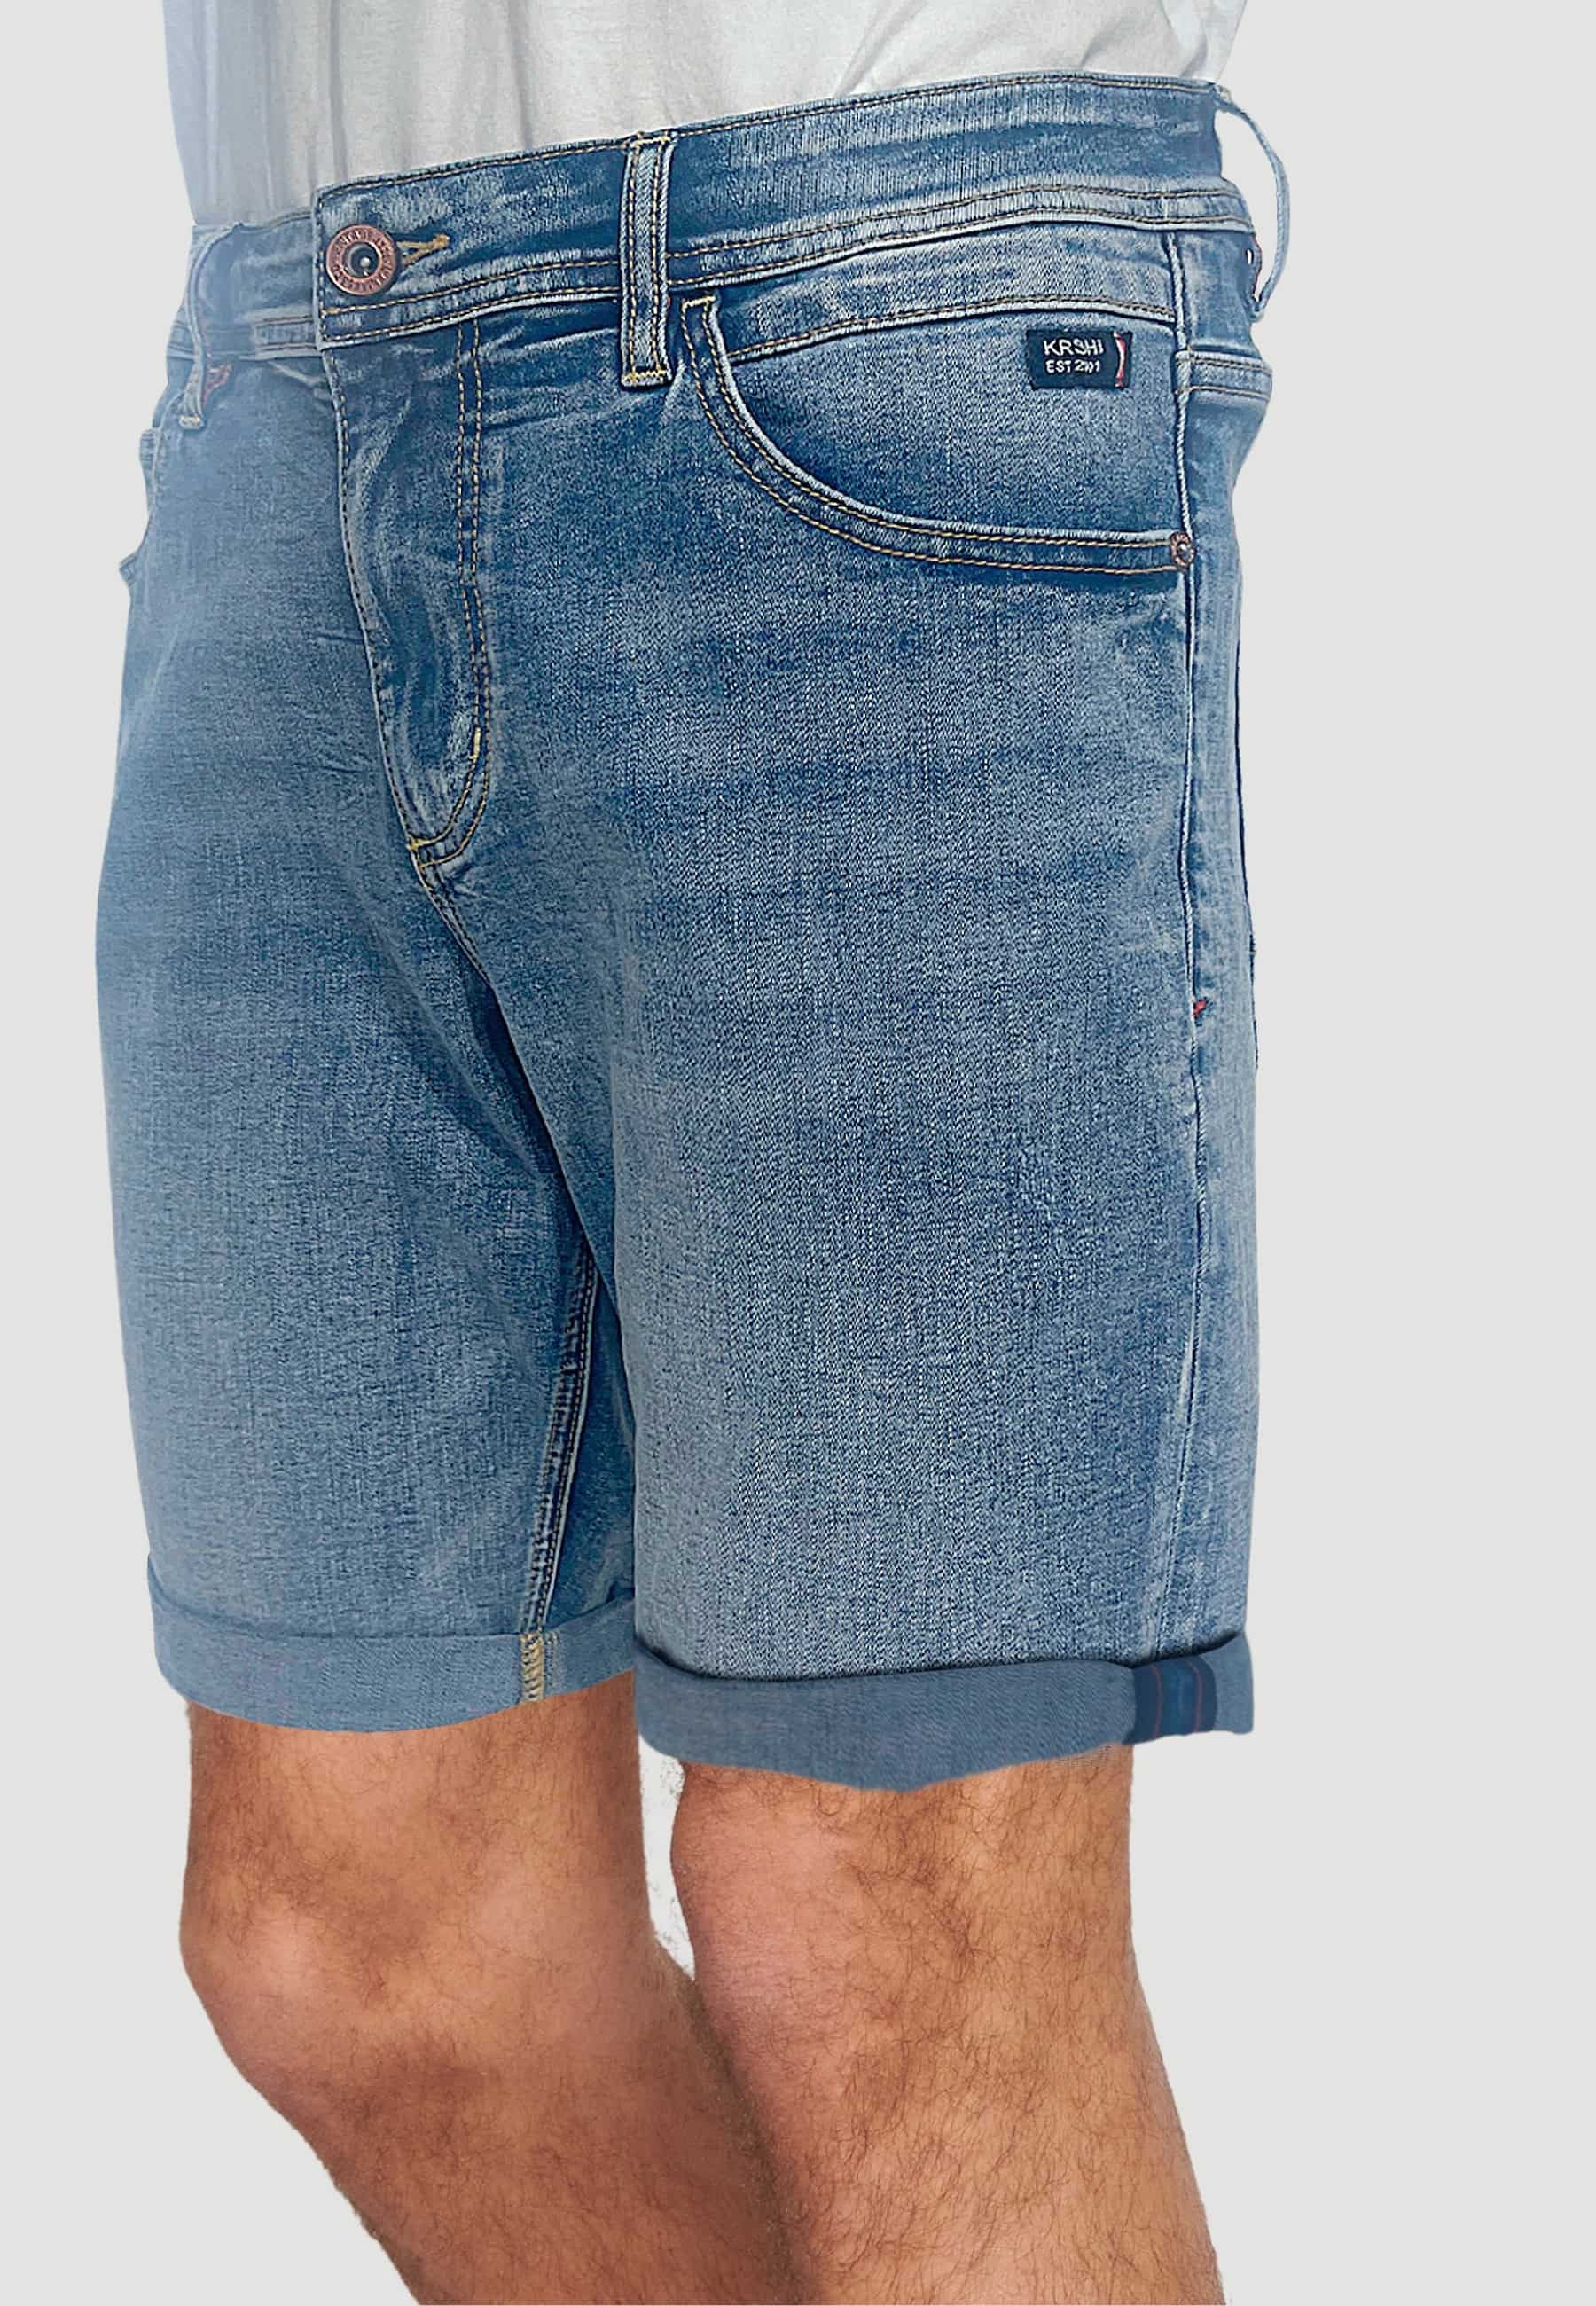 Denim Bermuda shorts with turn-up finish and front zipper and button closure with five pockets, one pocket pocket, in Blue for Men 1